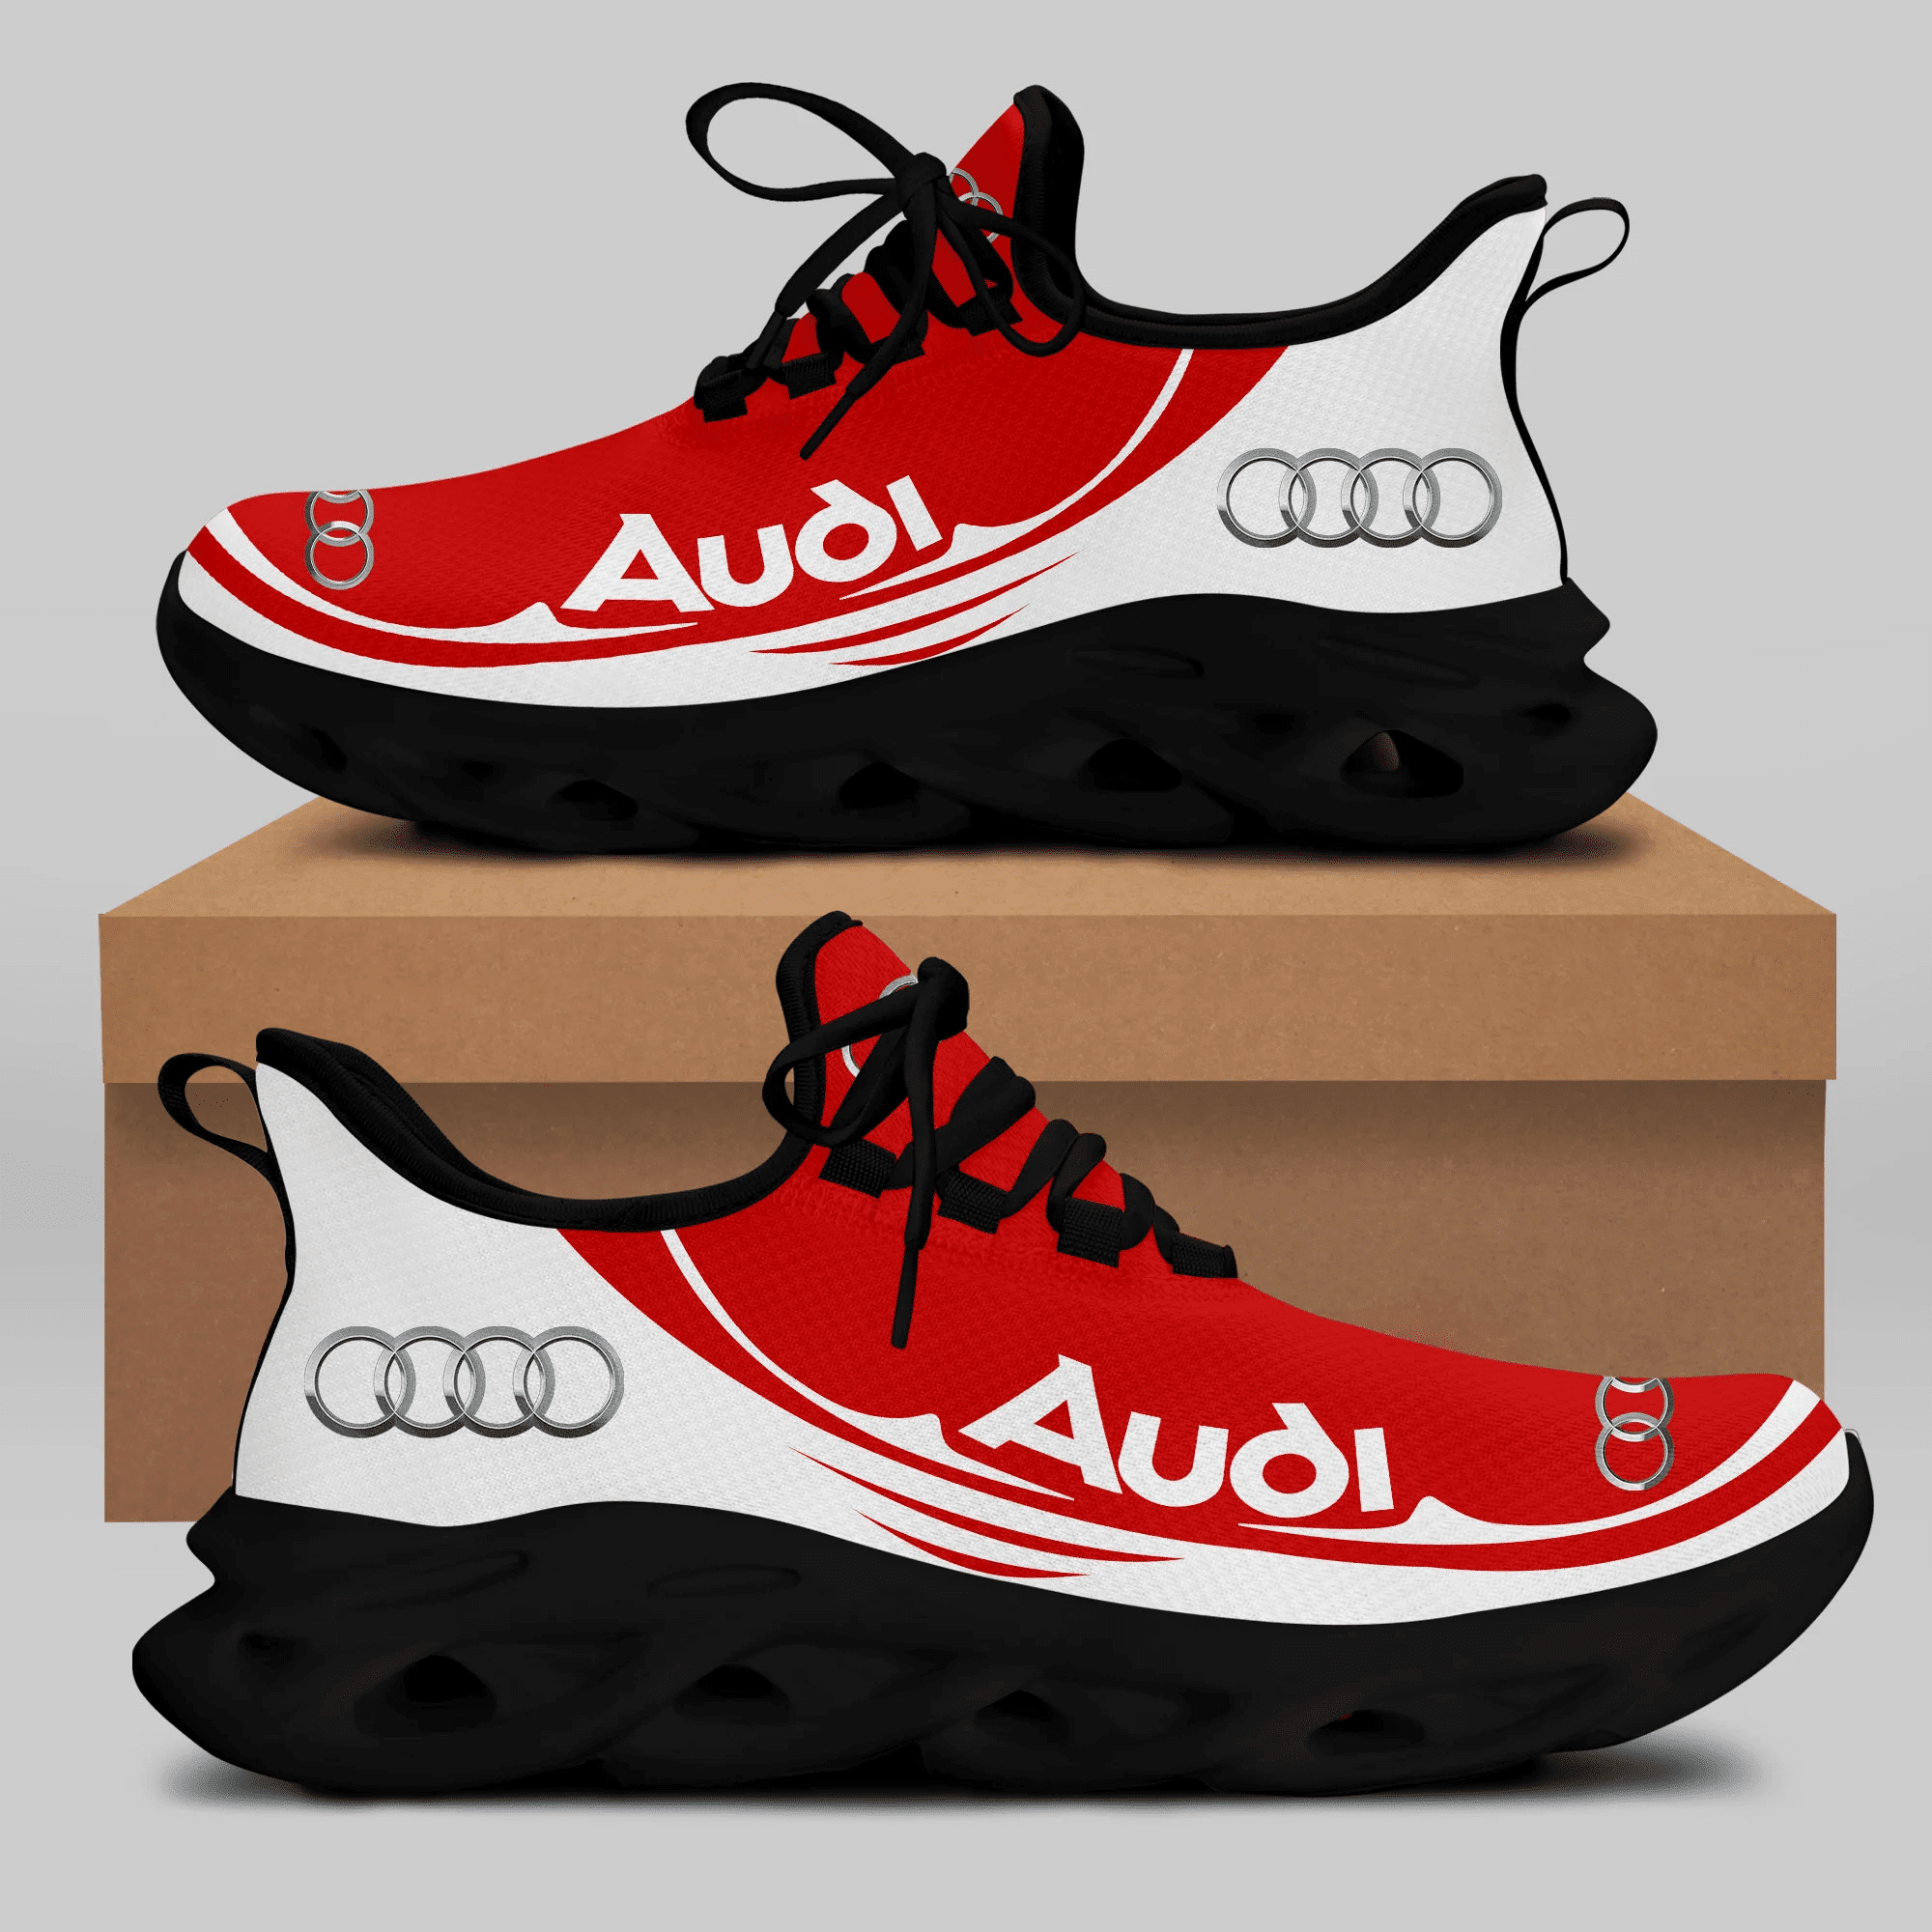 Audi Sport Running Shoes Max Soul Shoes Sneakers Ver 42 2